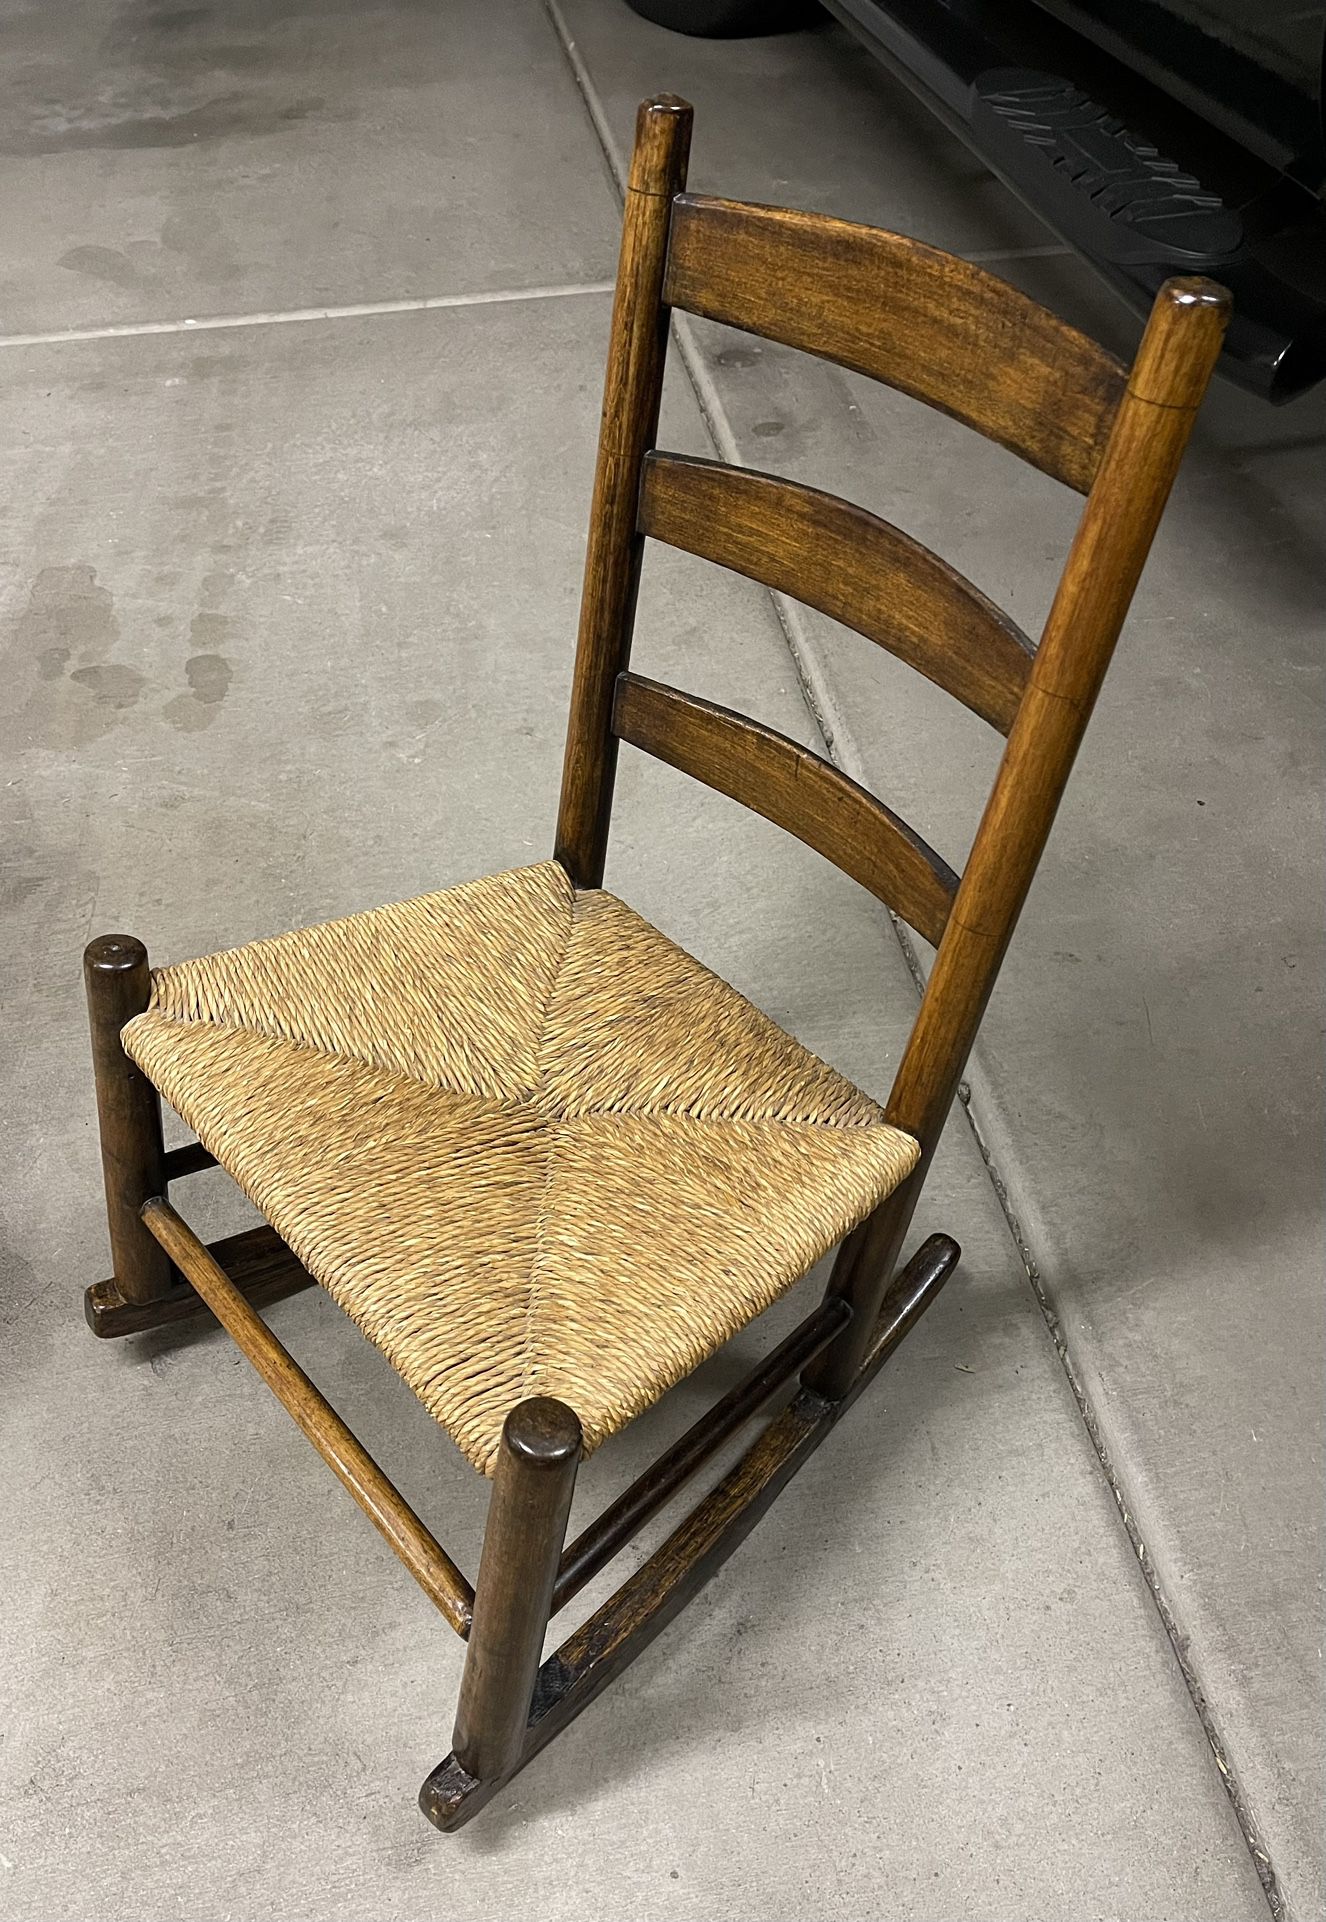 Antique Small walnut rocking chair from late 1800’s, 28 1/4” tall x 17” wide x 14” deep, Appraised for $165